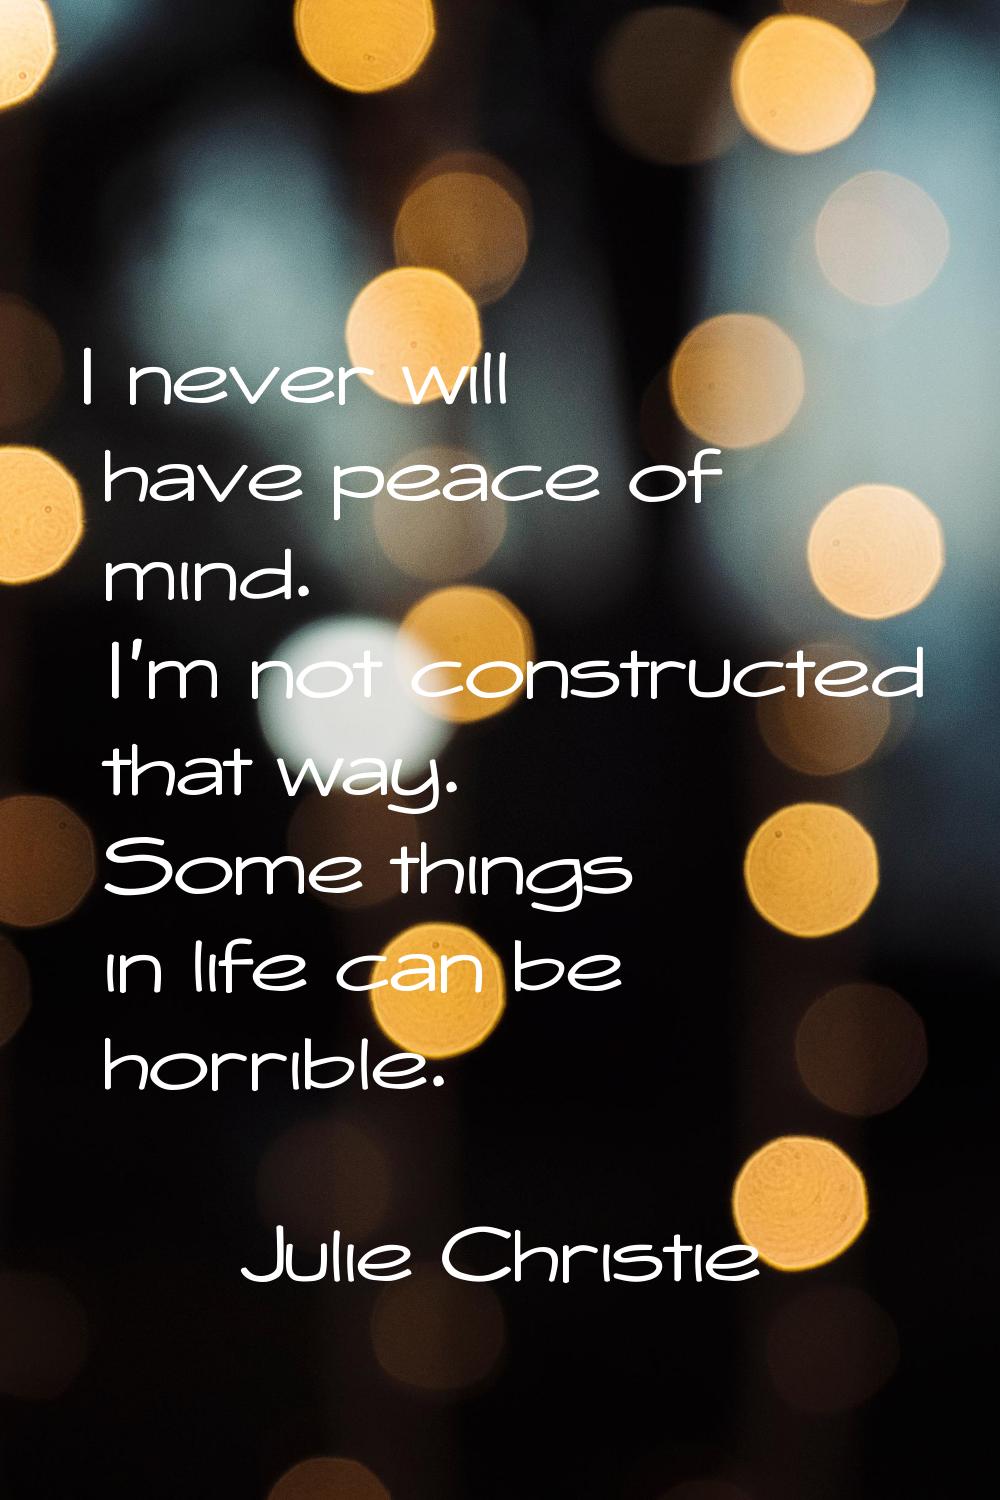 I never will have peace of mind. I'm not constructed that way. Some things in life can be horrible.